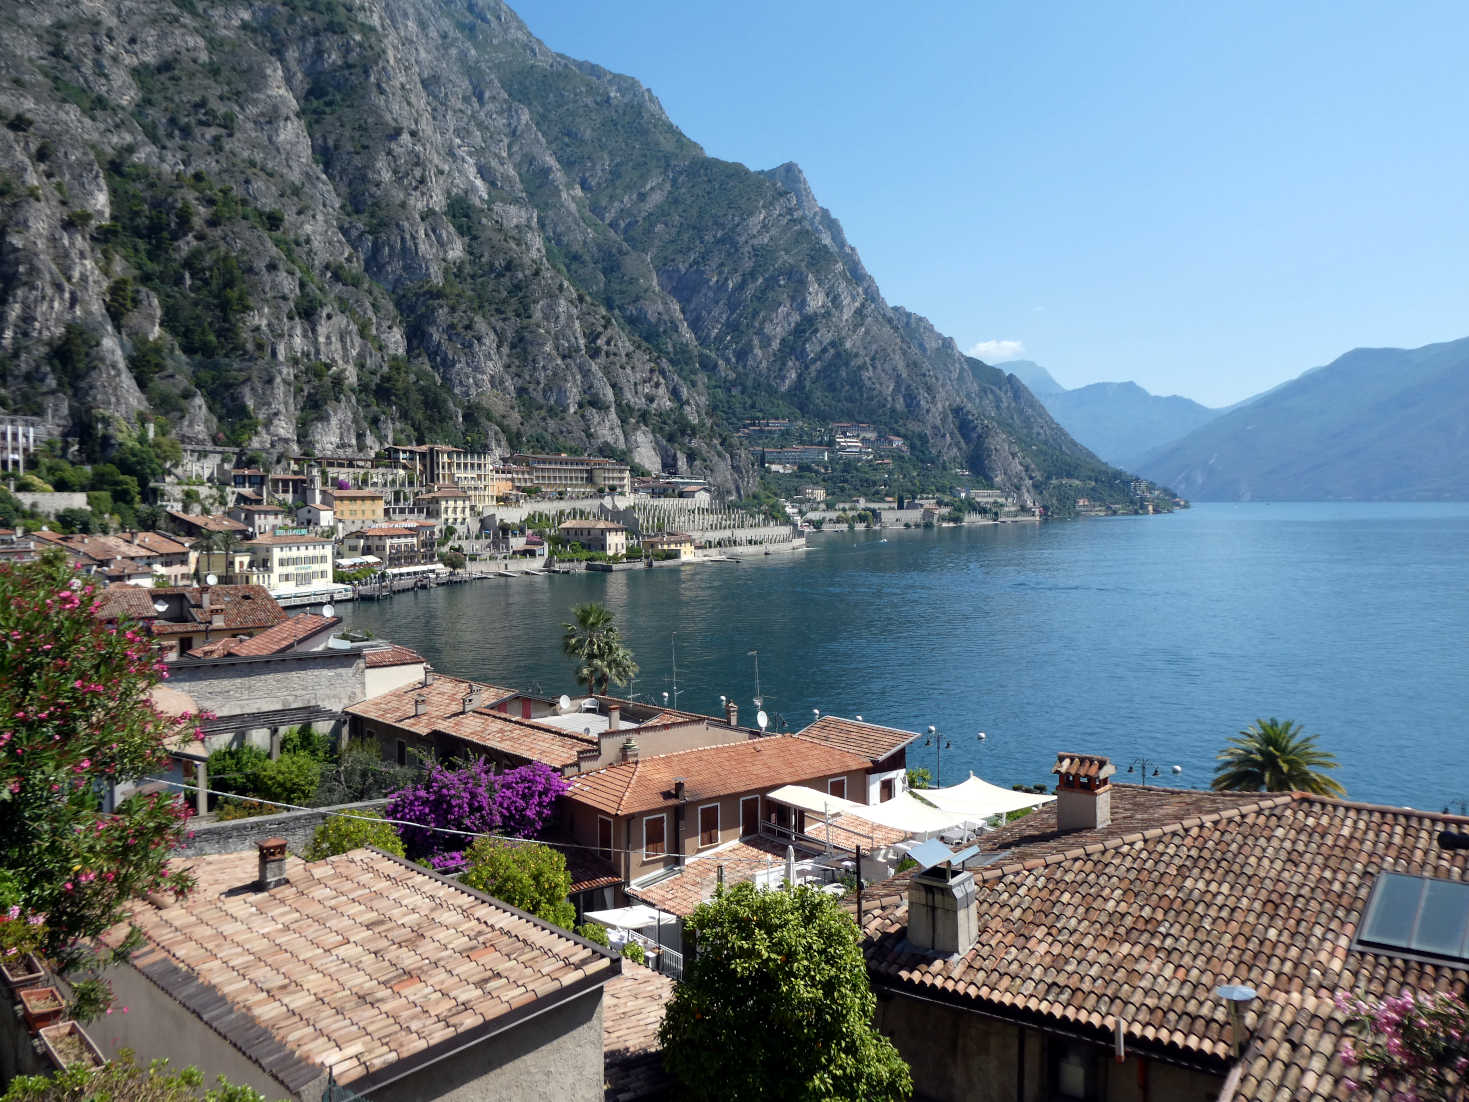 view from the church in Limone